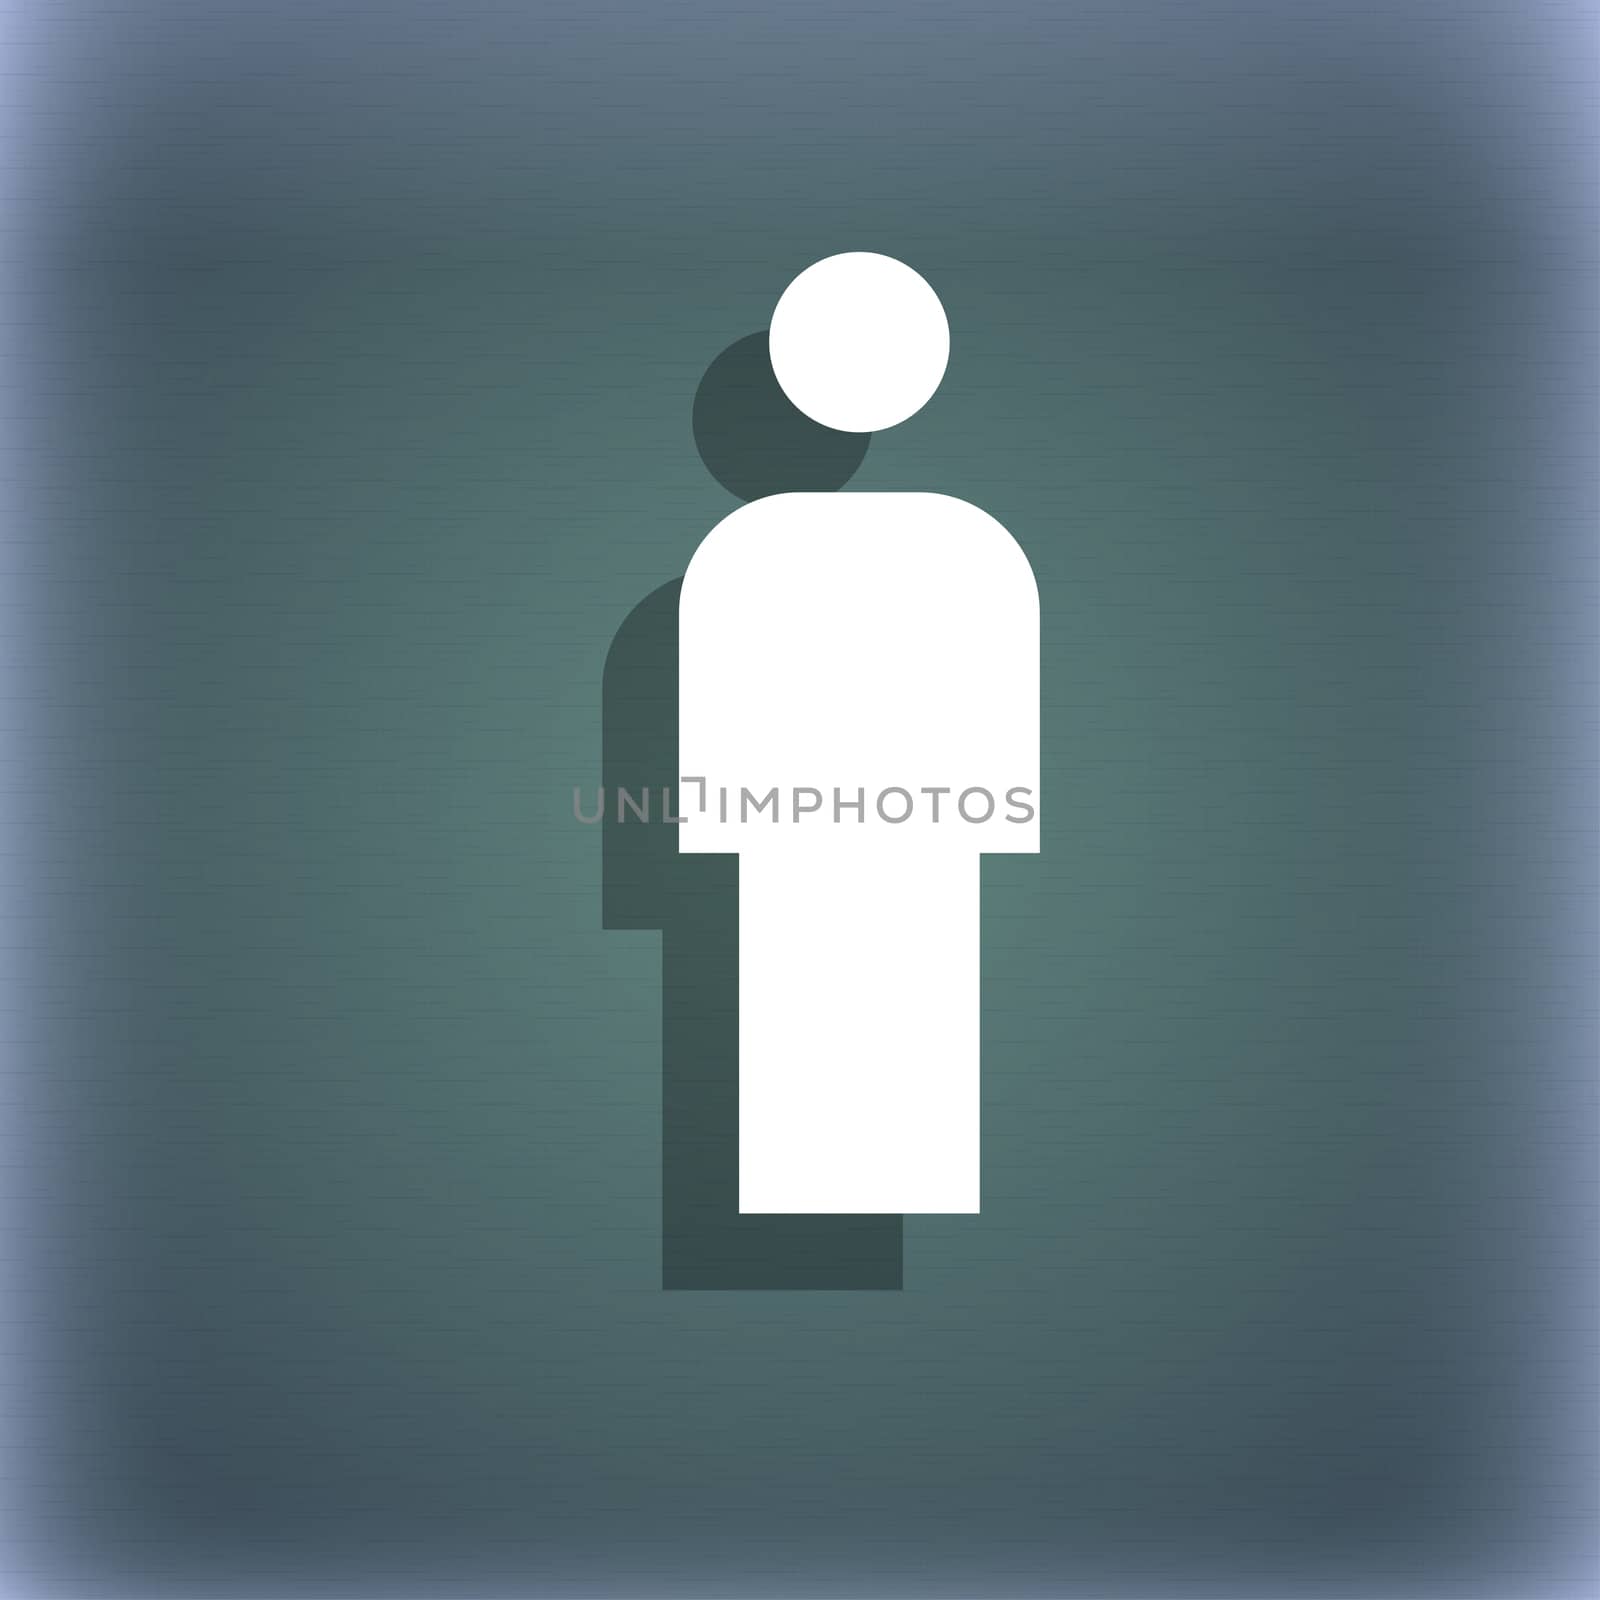 Human, Man Person, Male toilet icon symbol on the blue-green abstract background with shadow and space for your text. illustration